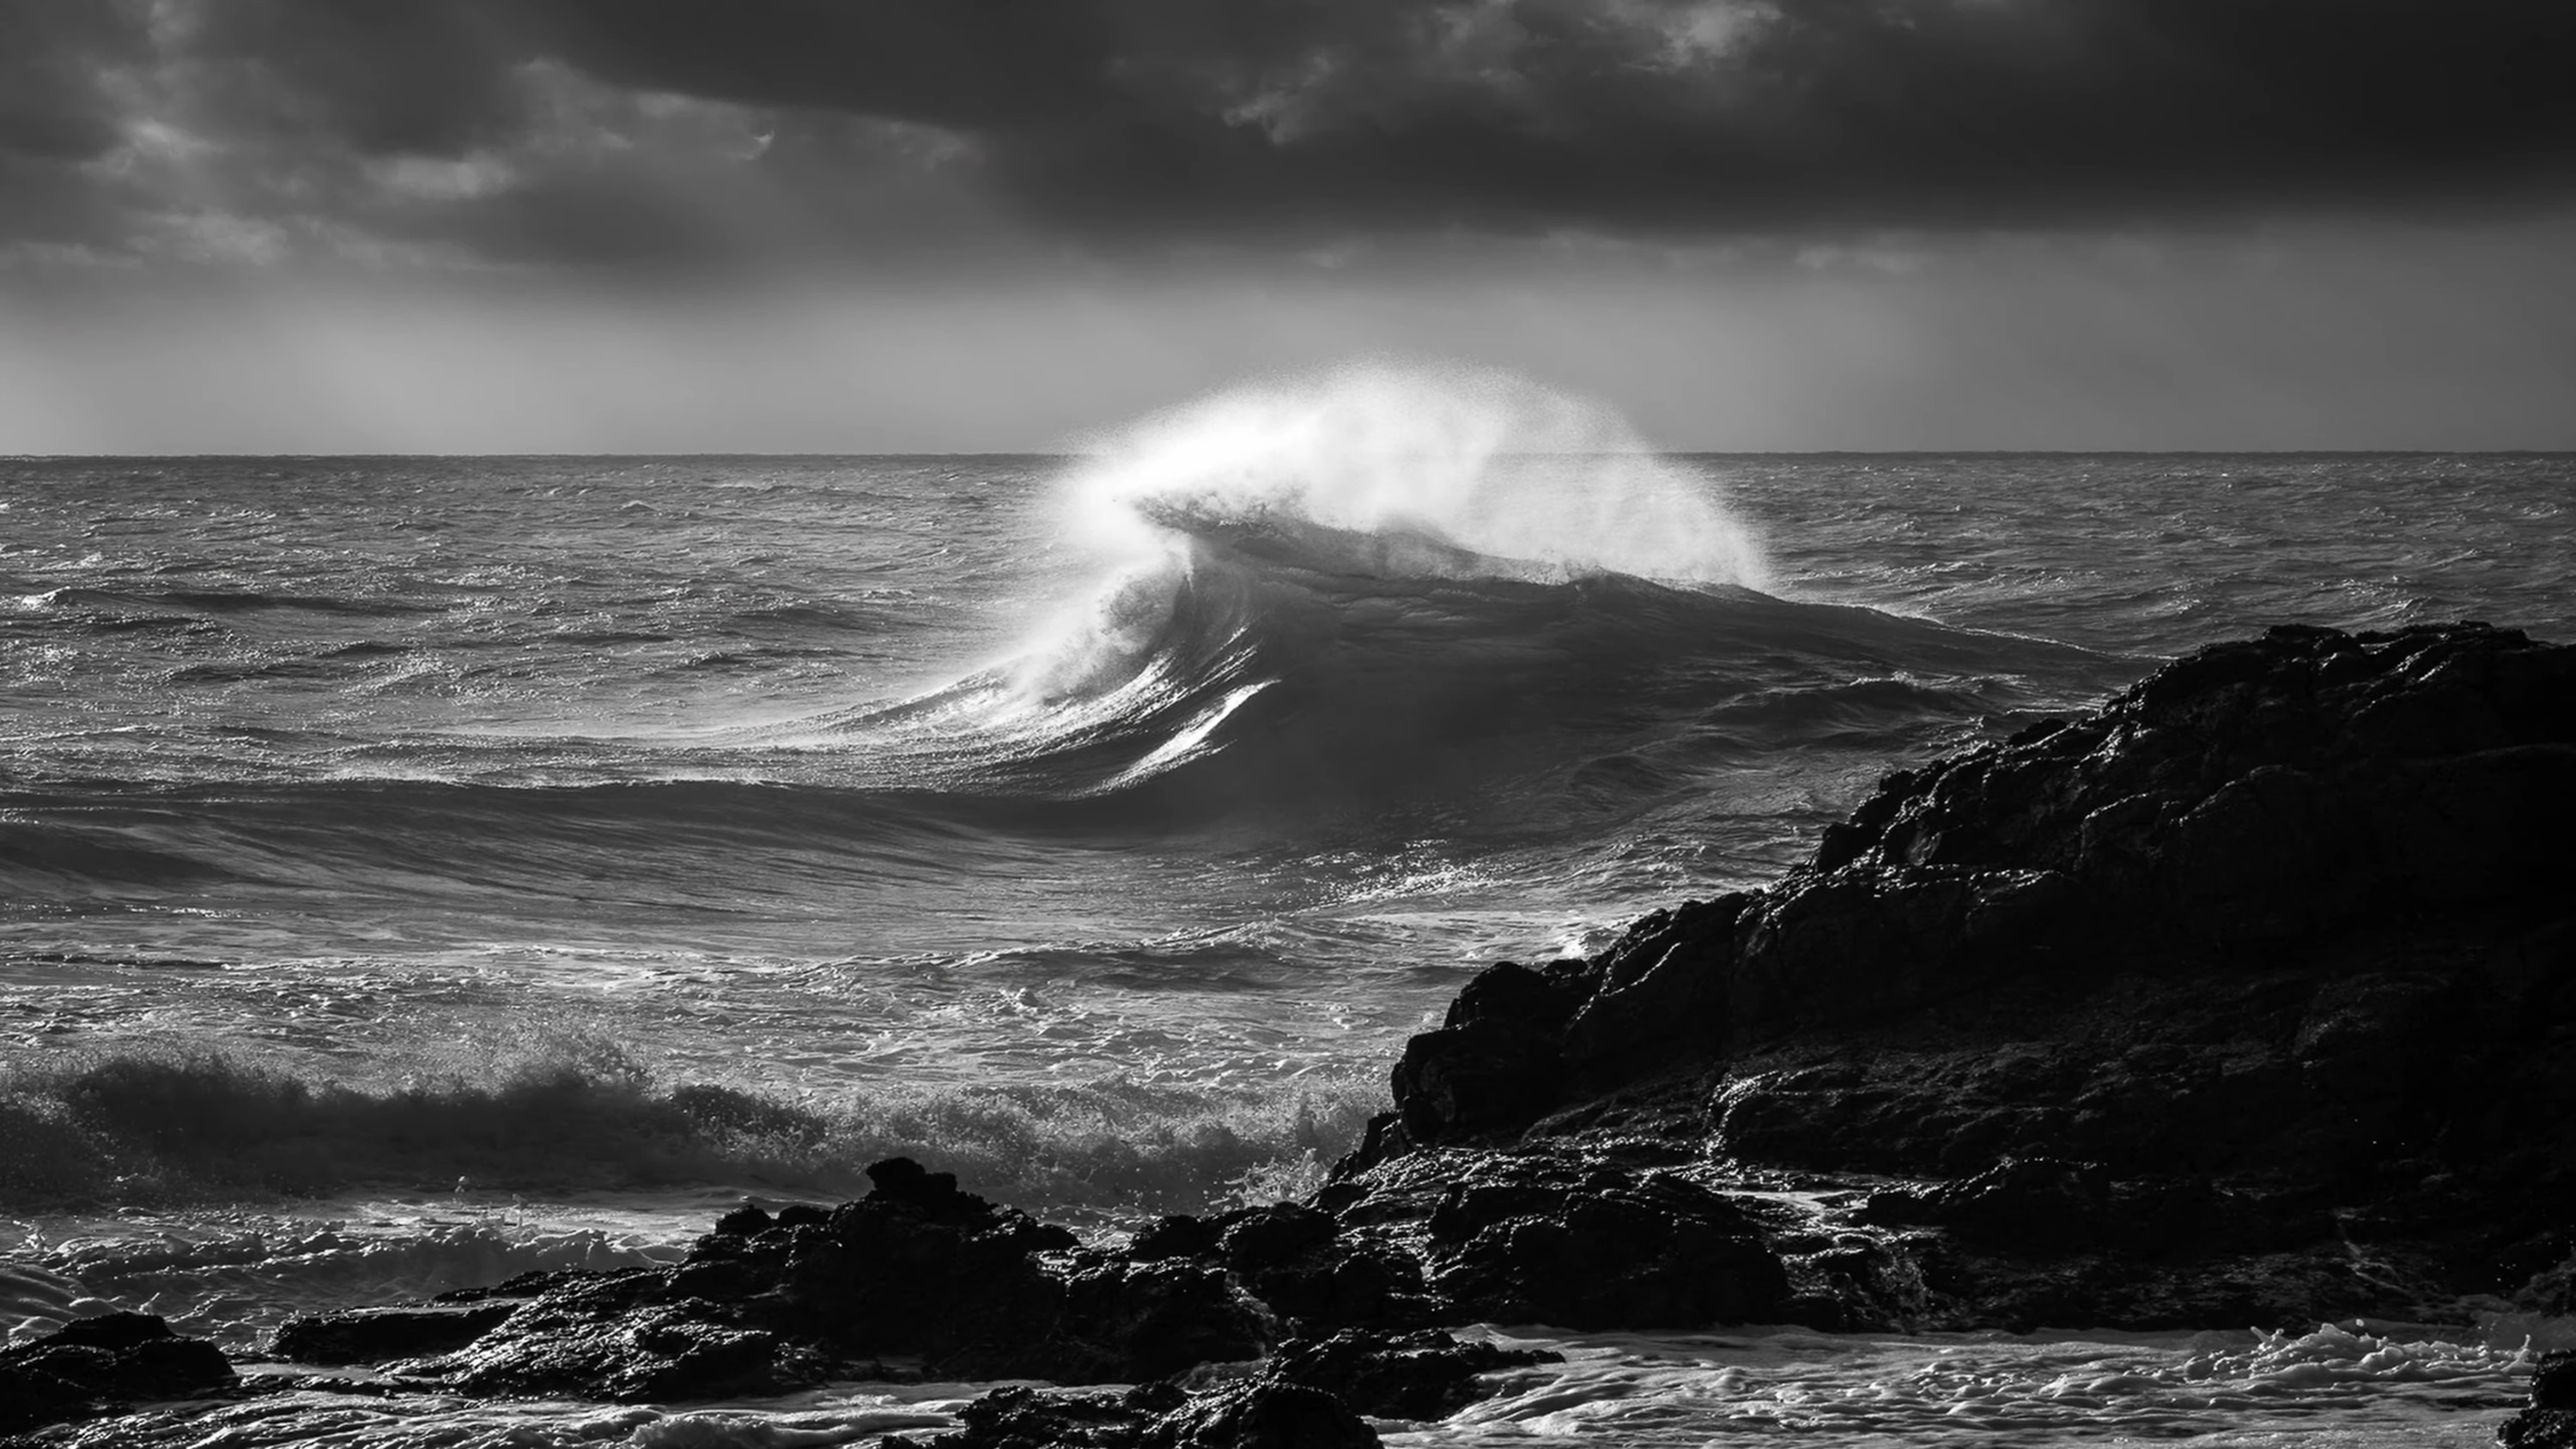 How to Create a Dramatic Black And White Landscape